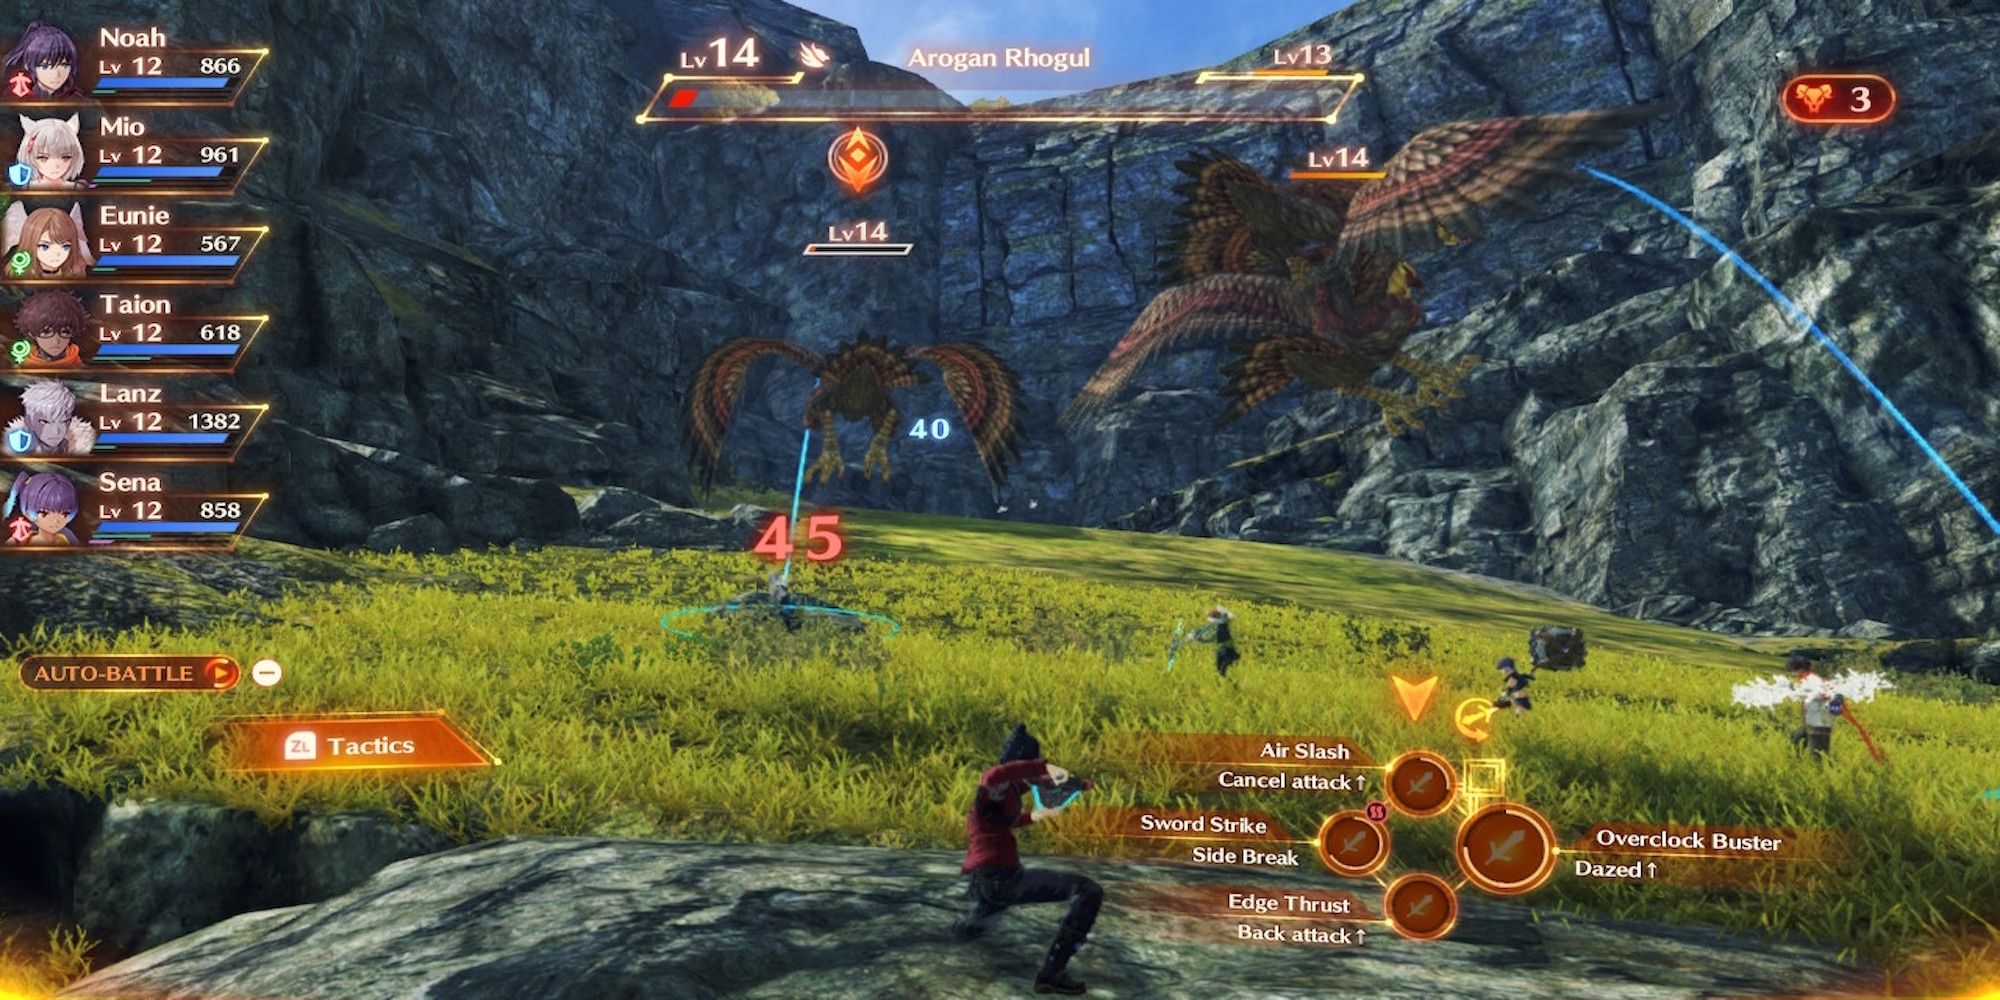 Fighting enemies in Xenoblade Chronicles 3